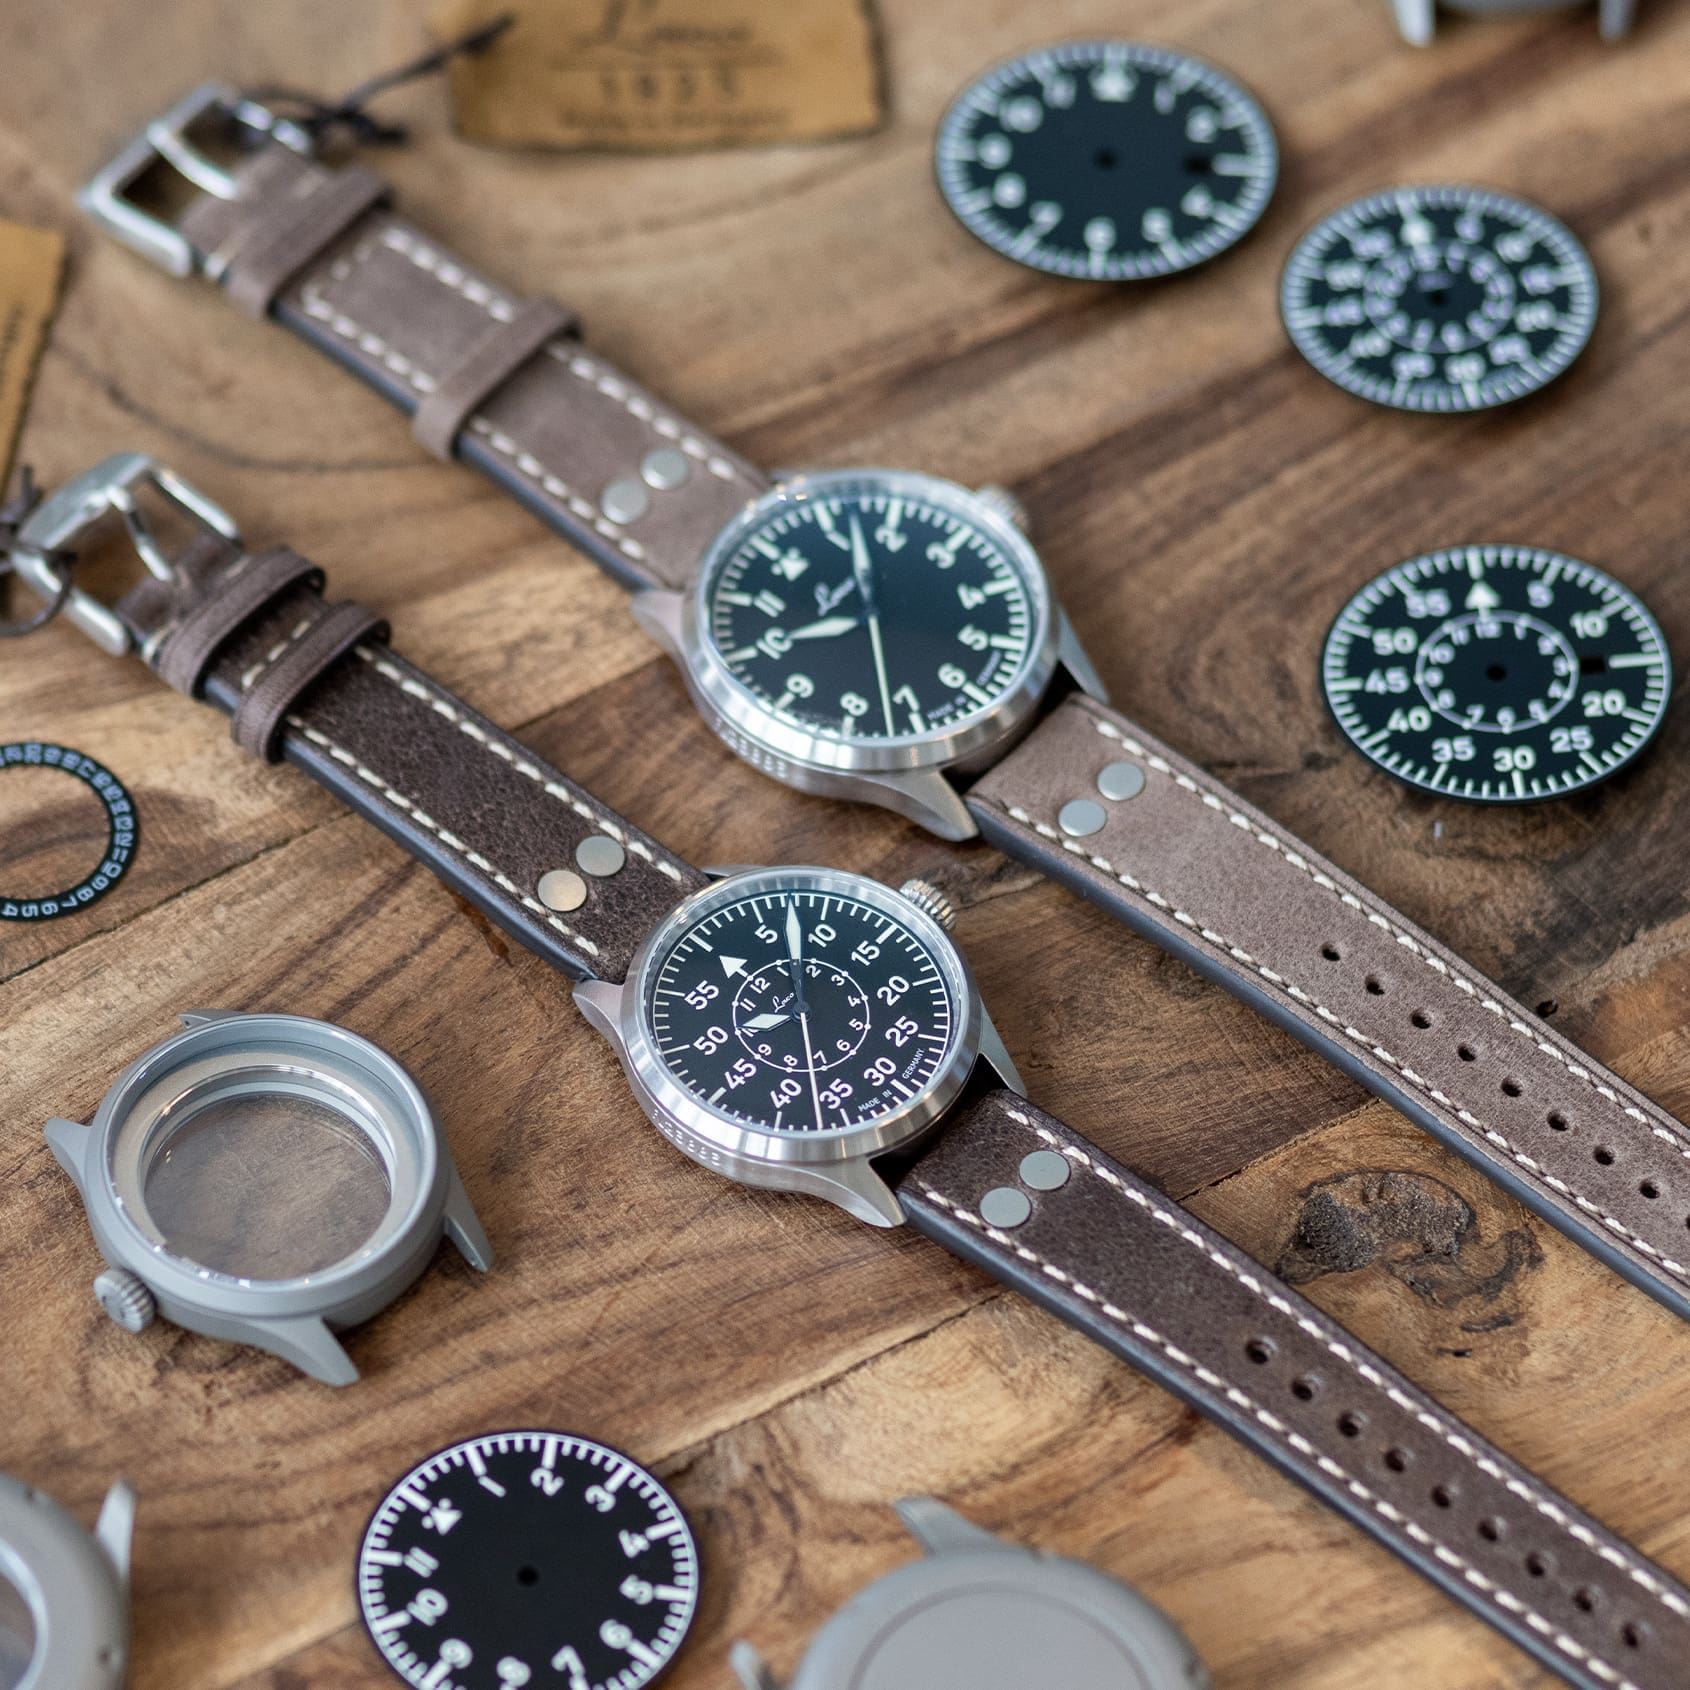 IN DEPTH: The Laco PRO Series lets you customise your ideal flieger pilot’s watch